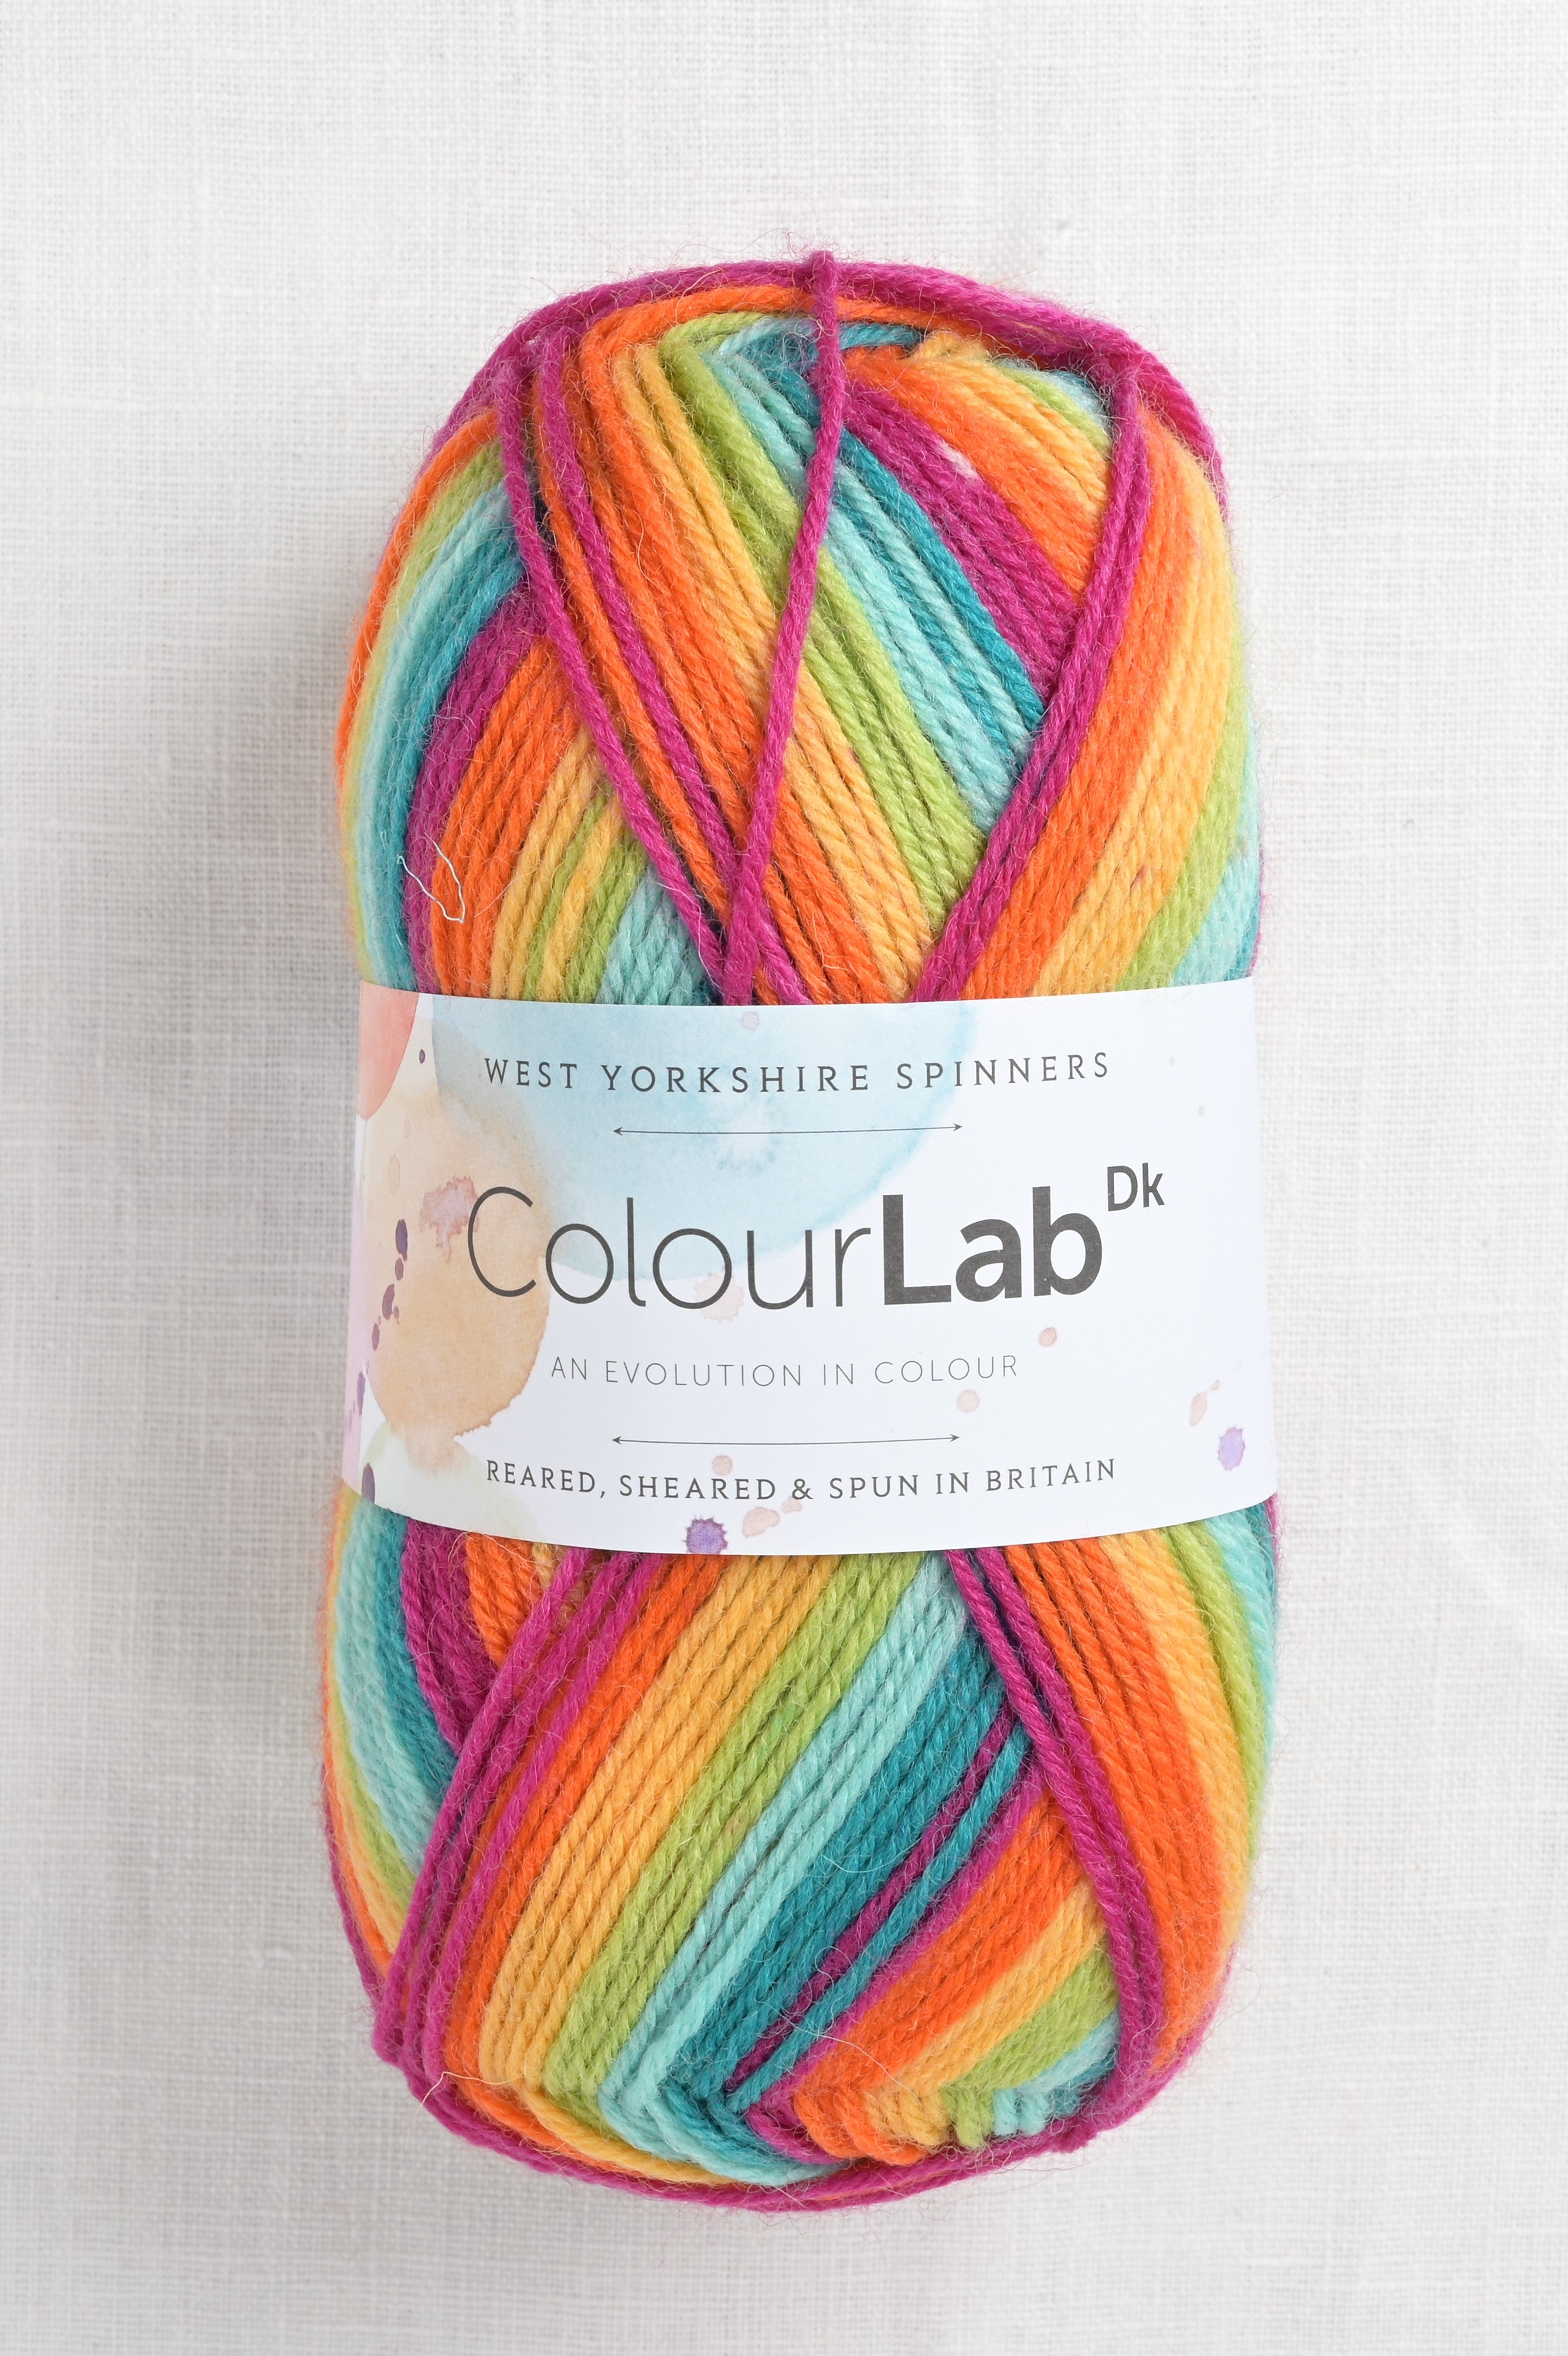 ColourLab Aran - West Yorkshire Spinners — Starlight Knitting Society